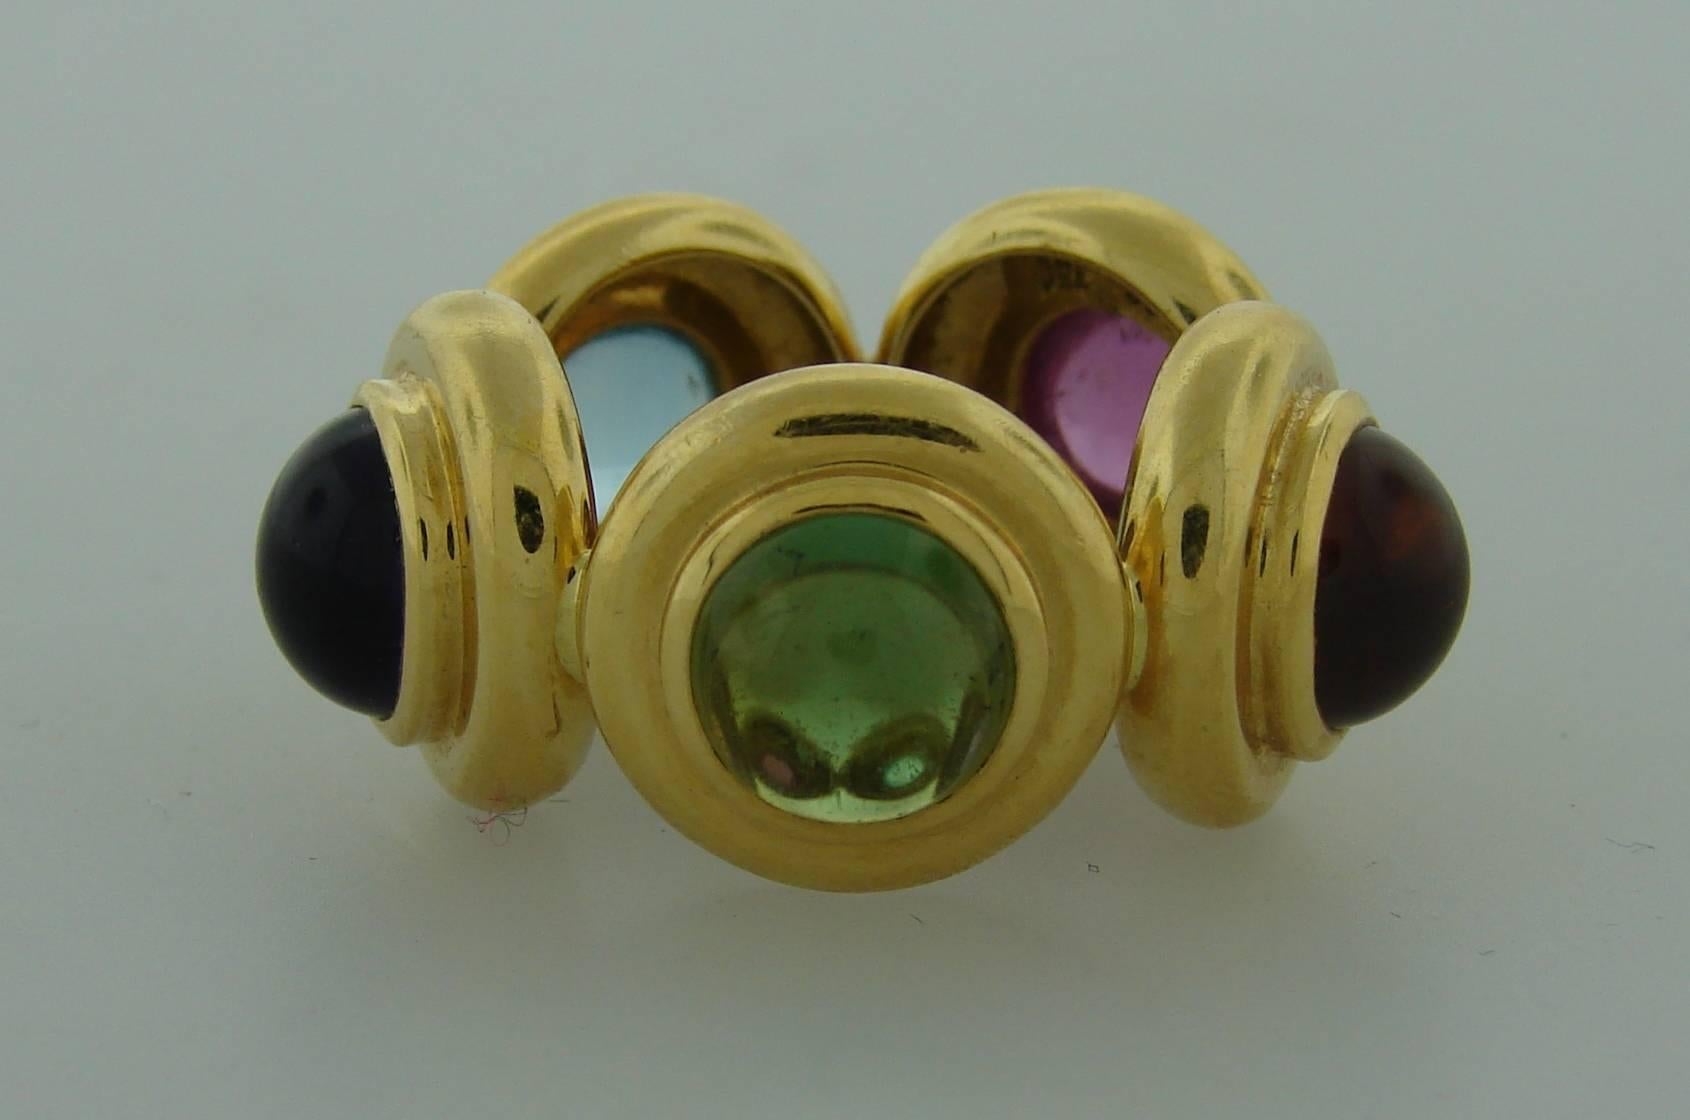 Chic colorful ring created by Paloma Picasso for Tiffany & Co. Made of 18k yellow gold and set with cabochon peridot, amethyst, aquamarine, rubelite, citrine. 
The ring is size 6.
It is stamped with Tiffany & Co. and Paloma Picasso maker's marks